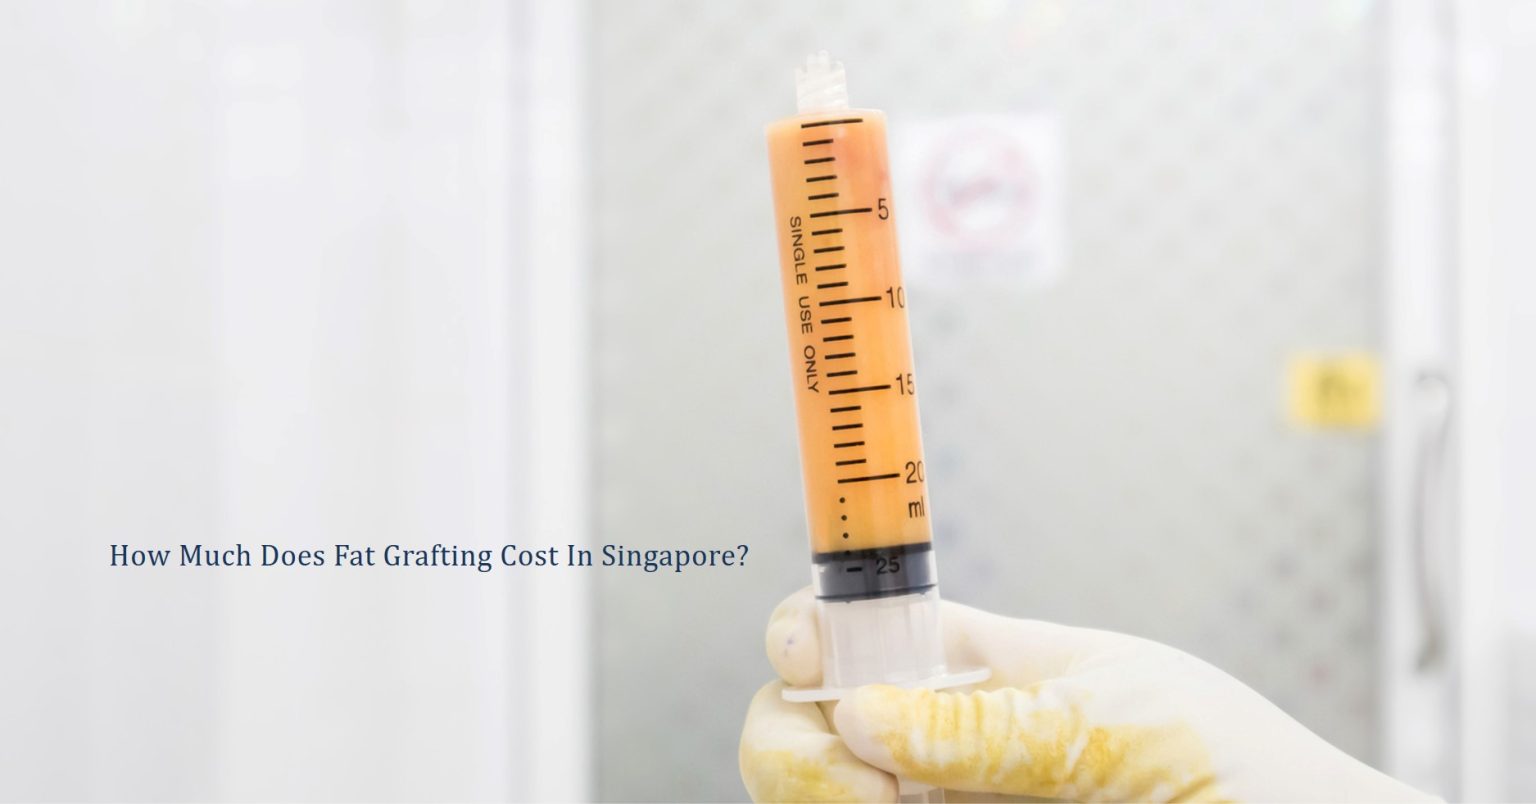 How Much Does Fat Grafting Cost In Singapore